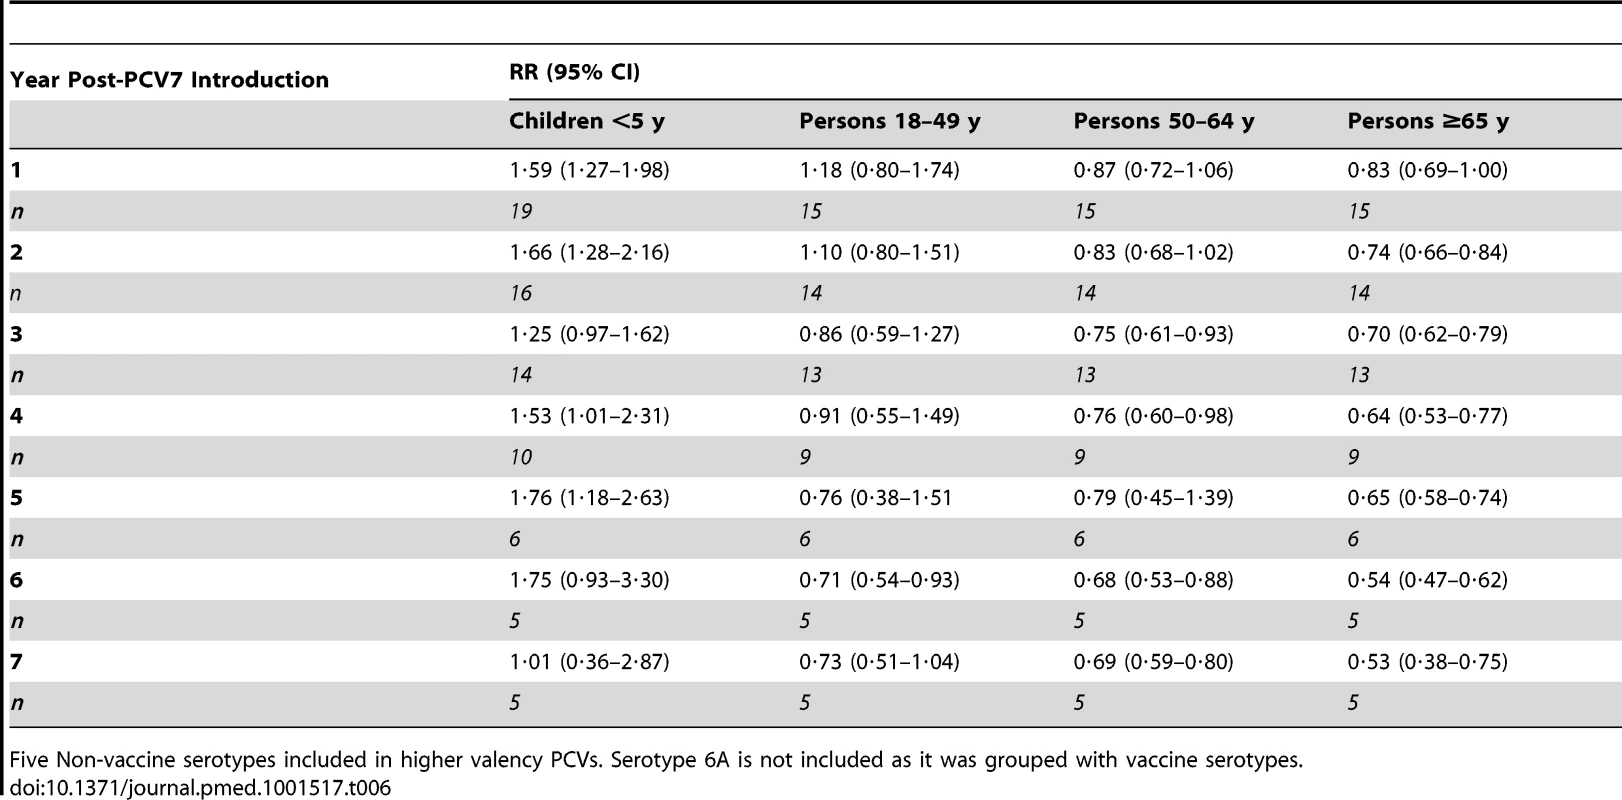 Summary rate ratios comparing the rate of serotypes 1, 3, 5, 7F, and 19A over the rate of all other non-vaccine types in each year post-PCV7 introduction, from random effects meta-analysis.